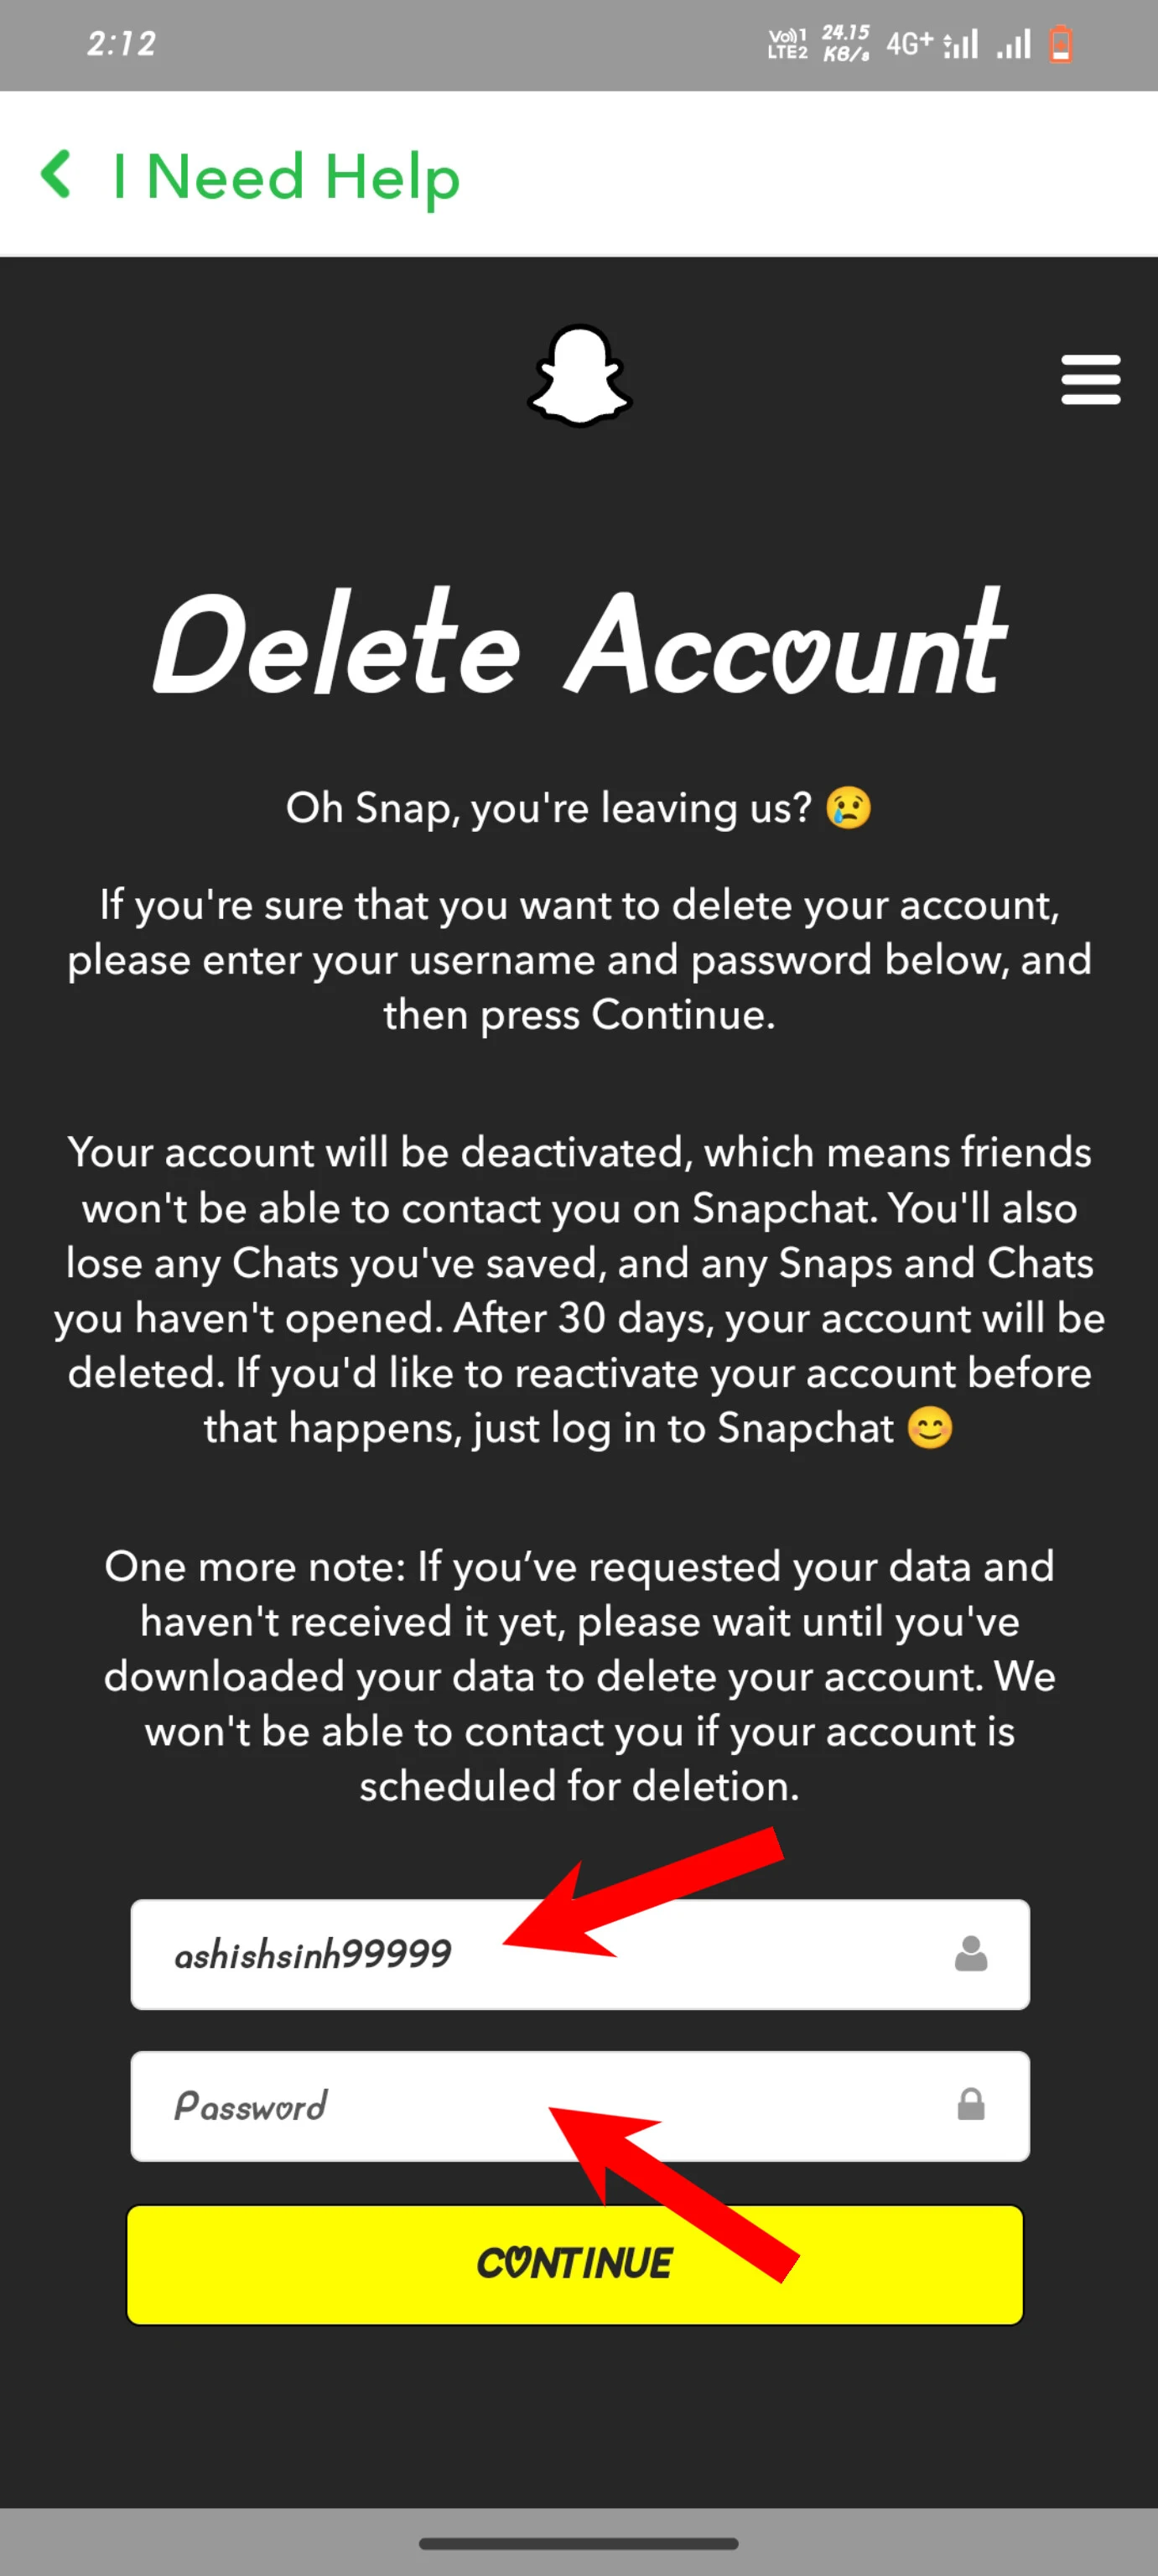 How to delete my snapchat account permanently